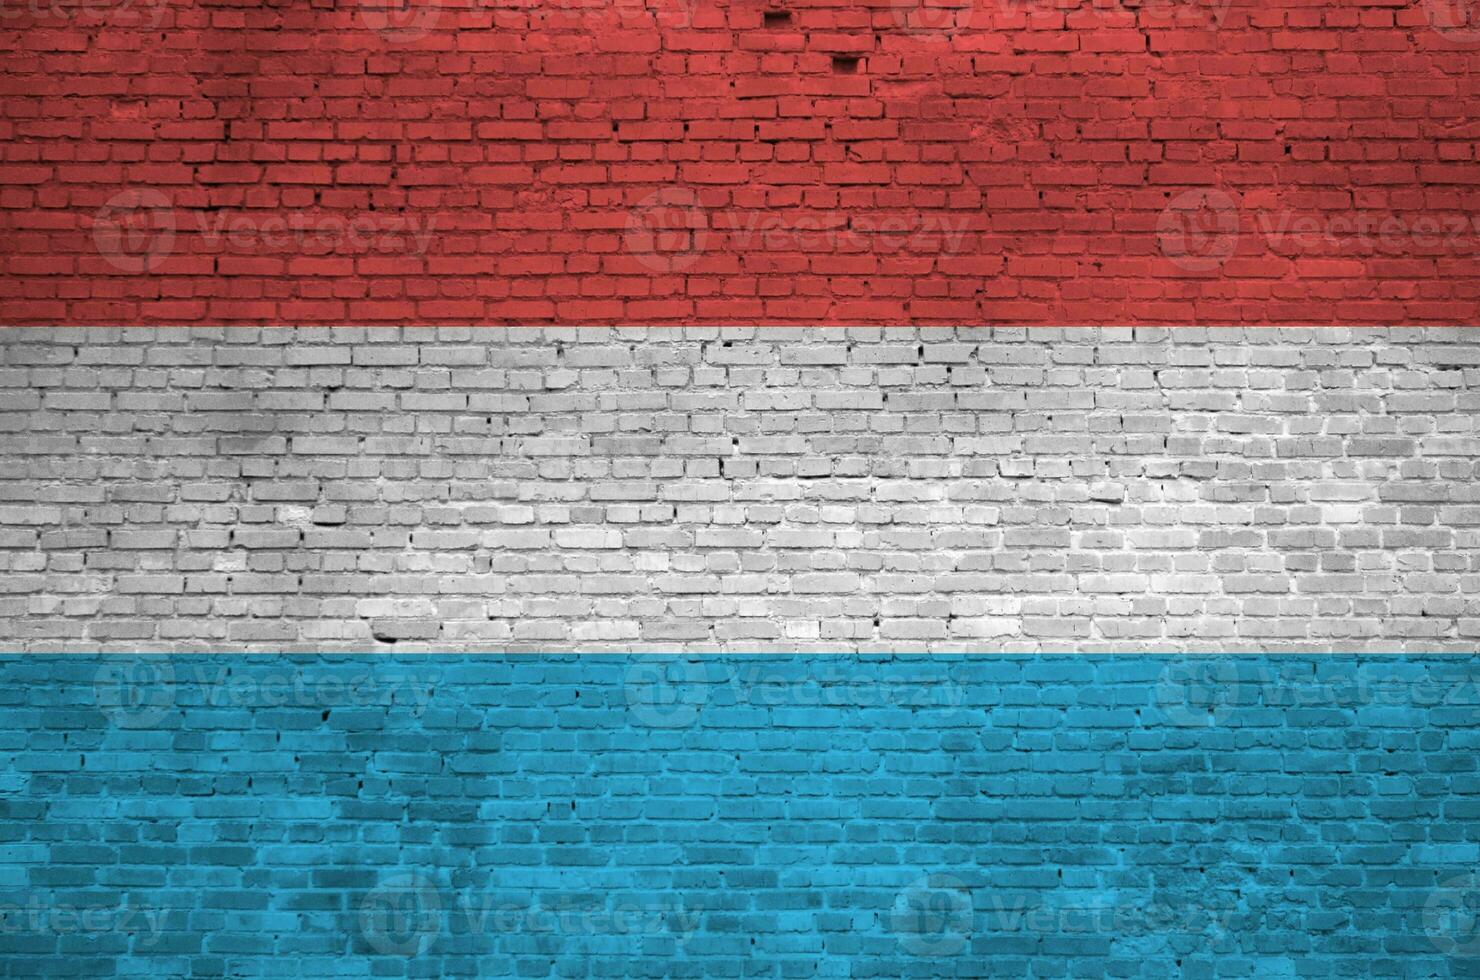 Luxembourg flag depicted in paint colors on old brick wall. Textured banner on big brick wall masonry background photo